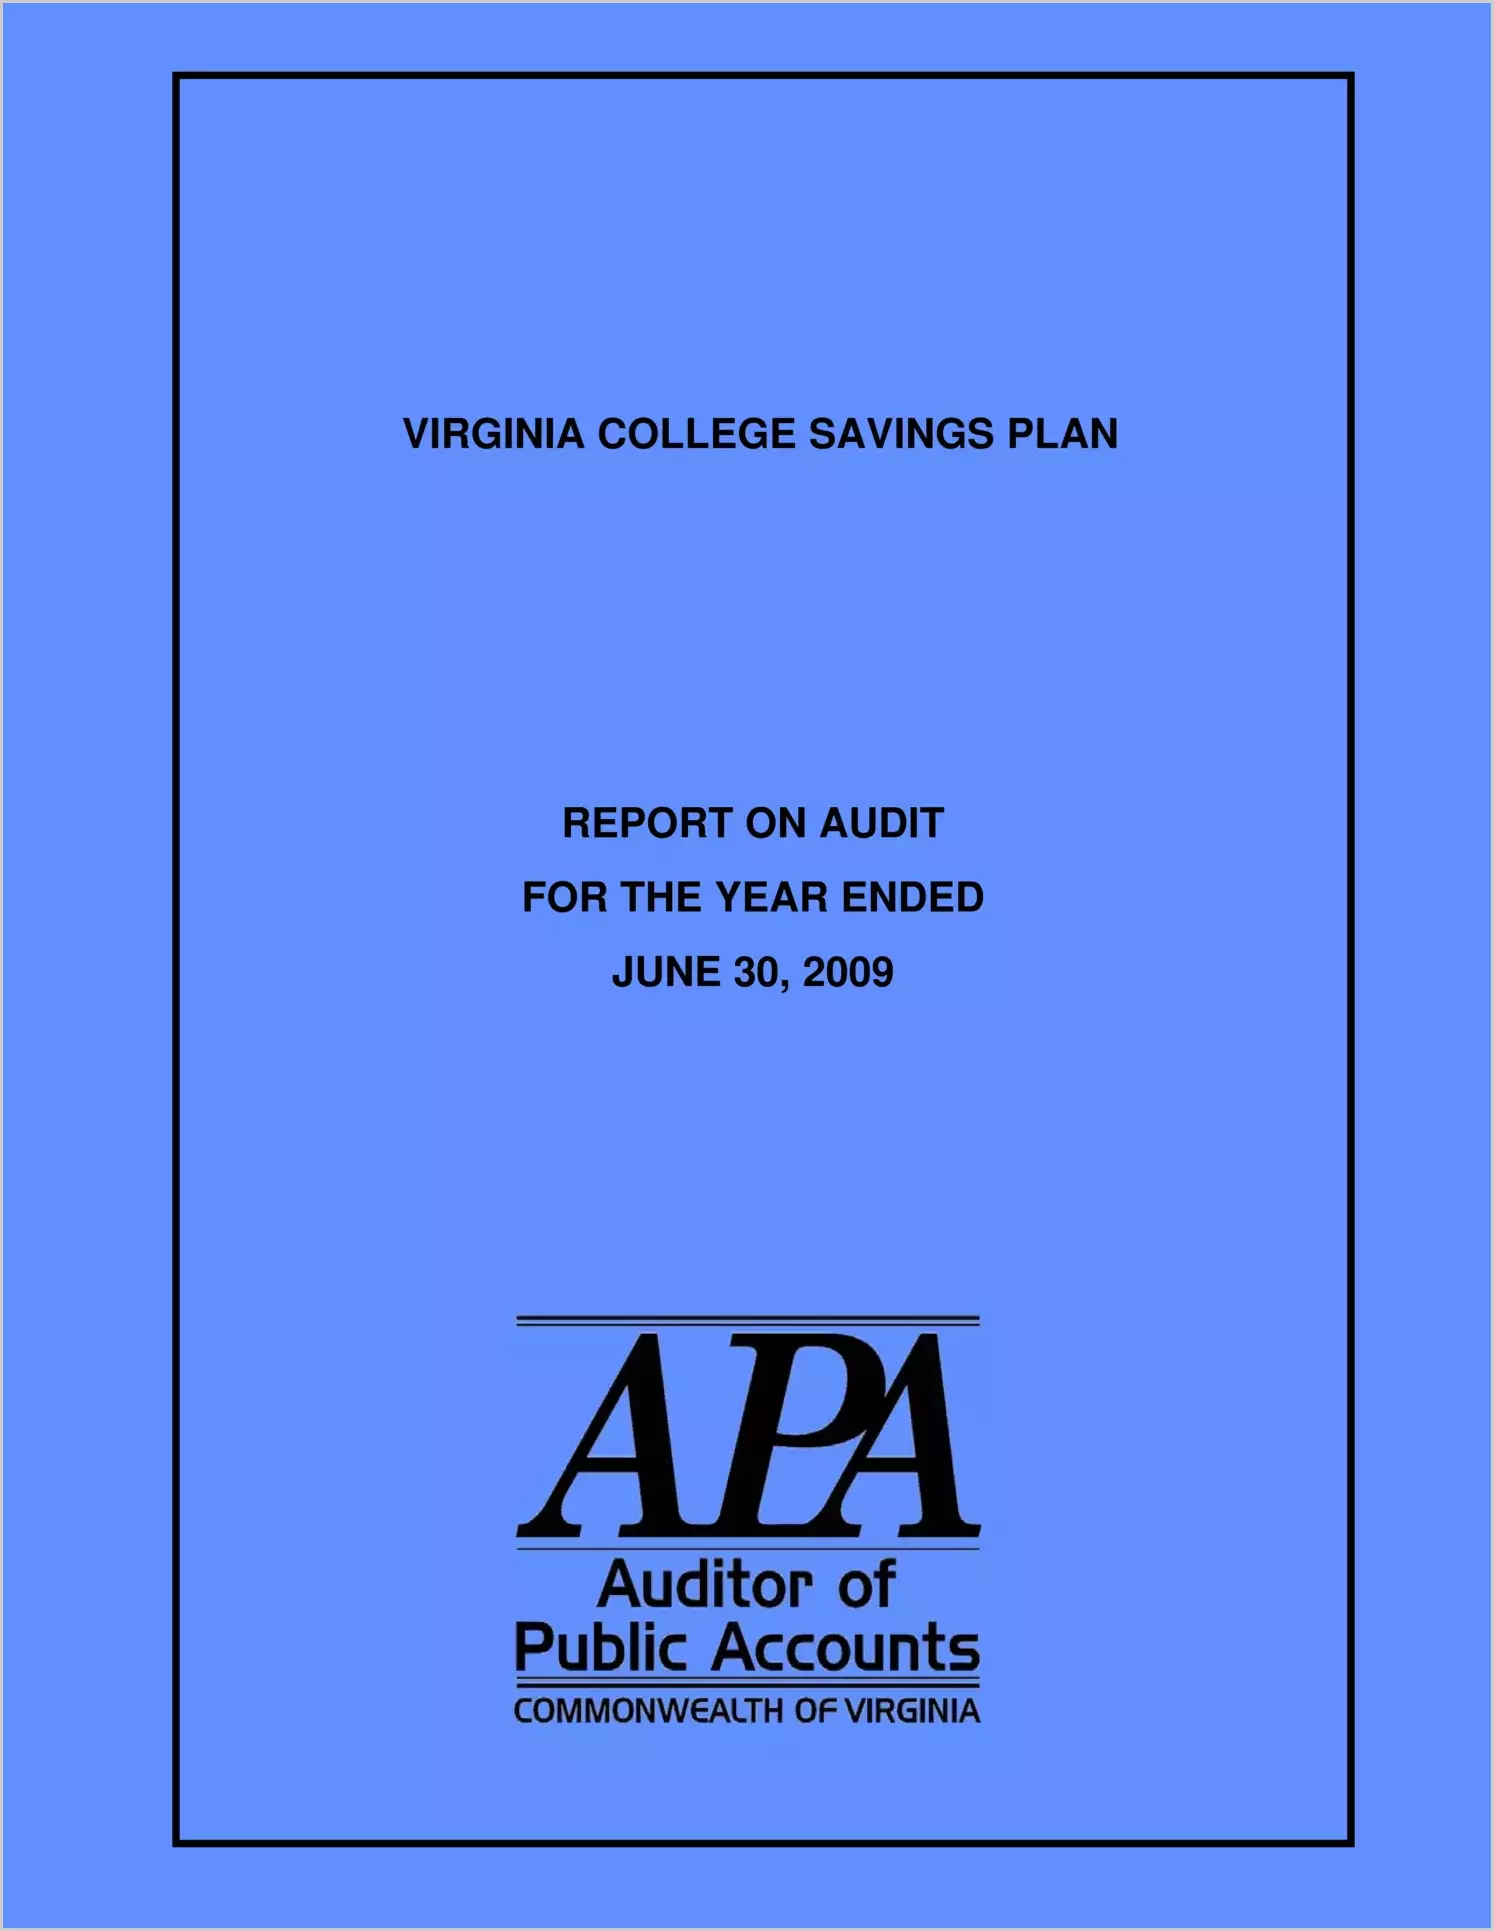 Virginia College Savings Plan for the year ended June 30, 2009